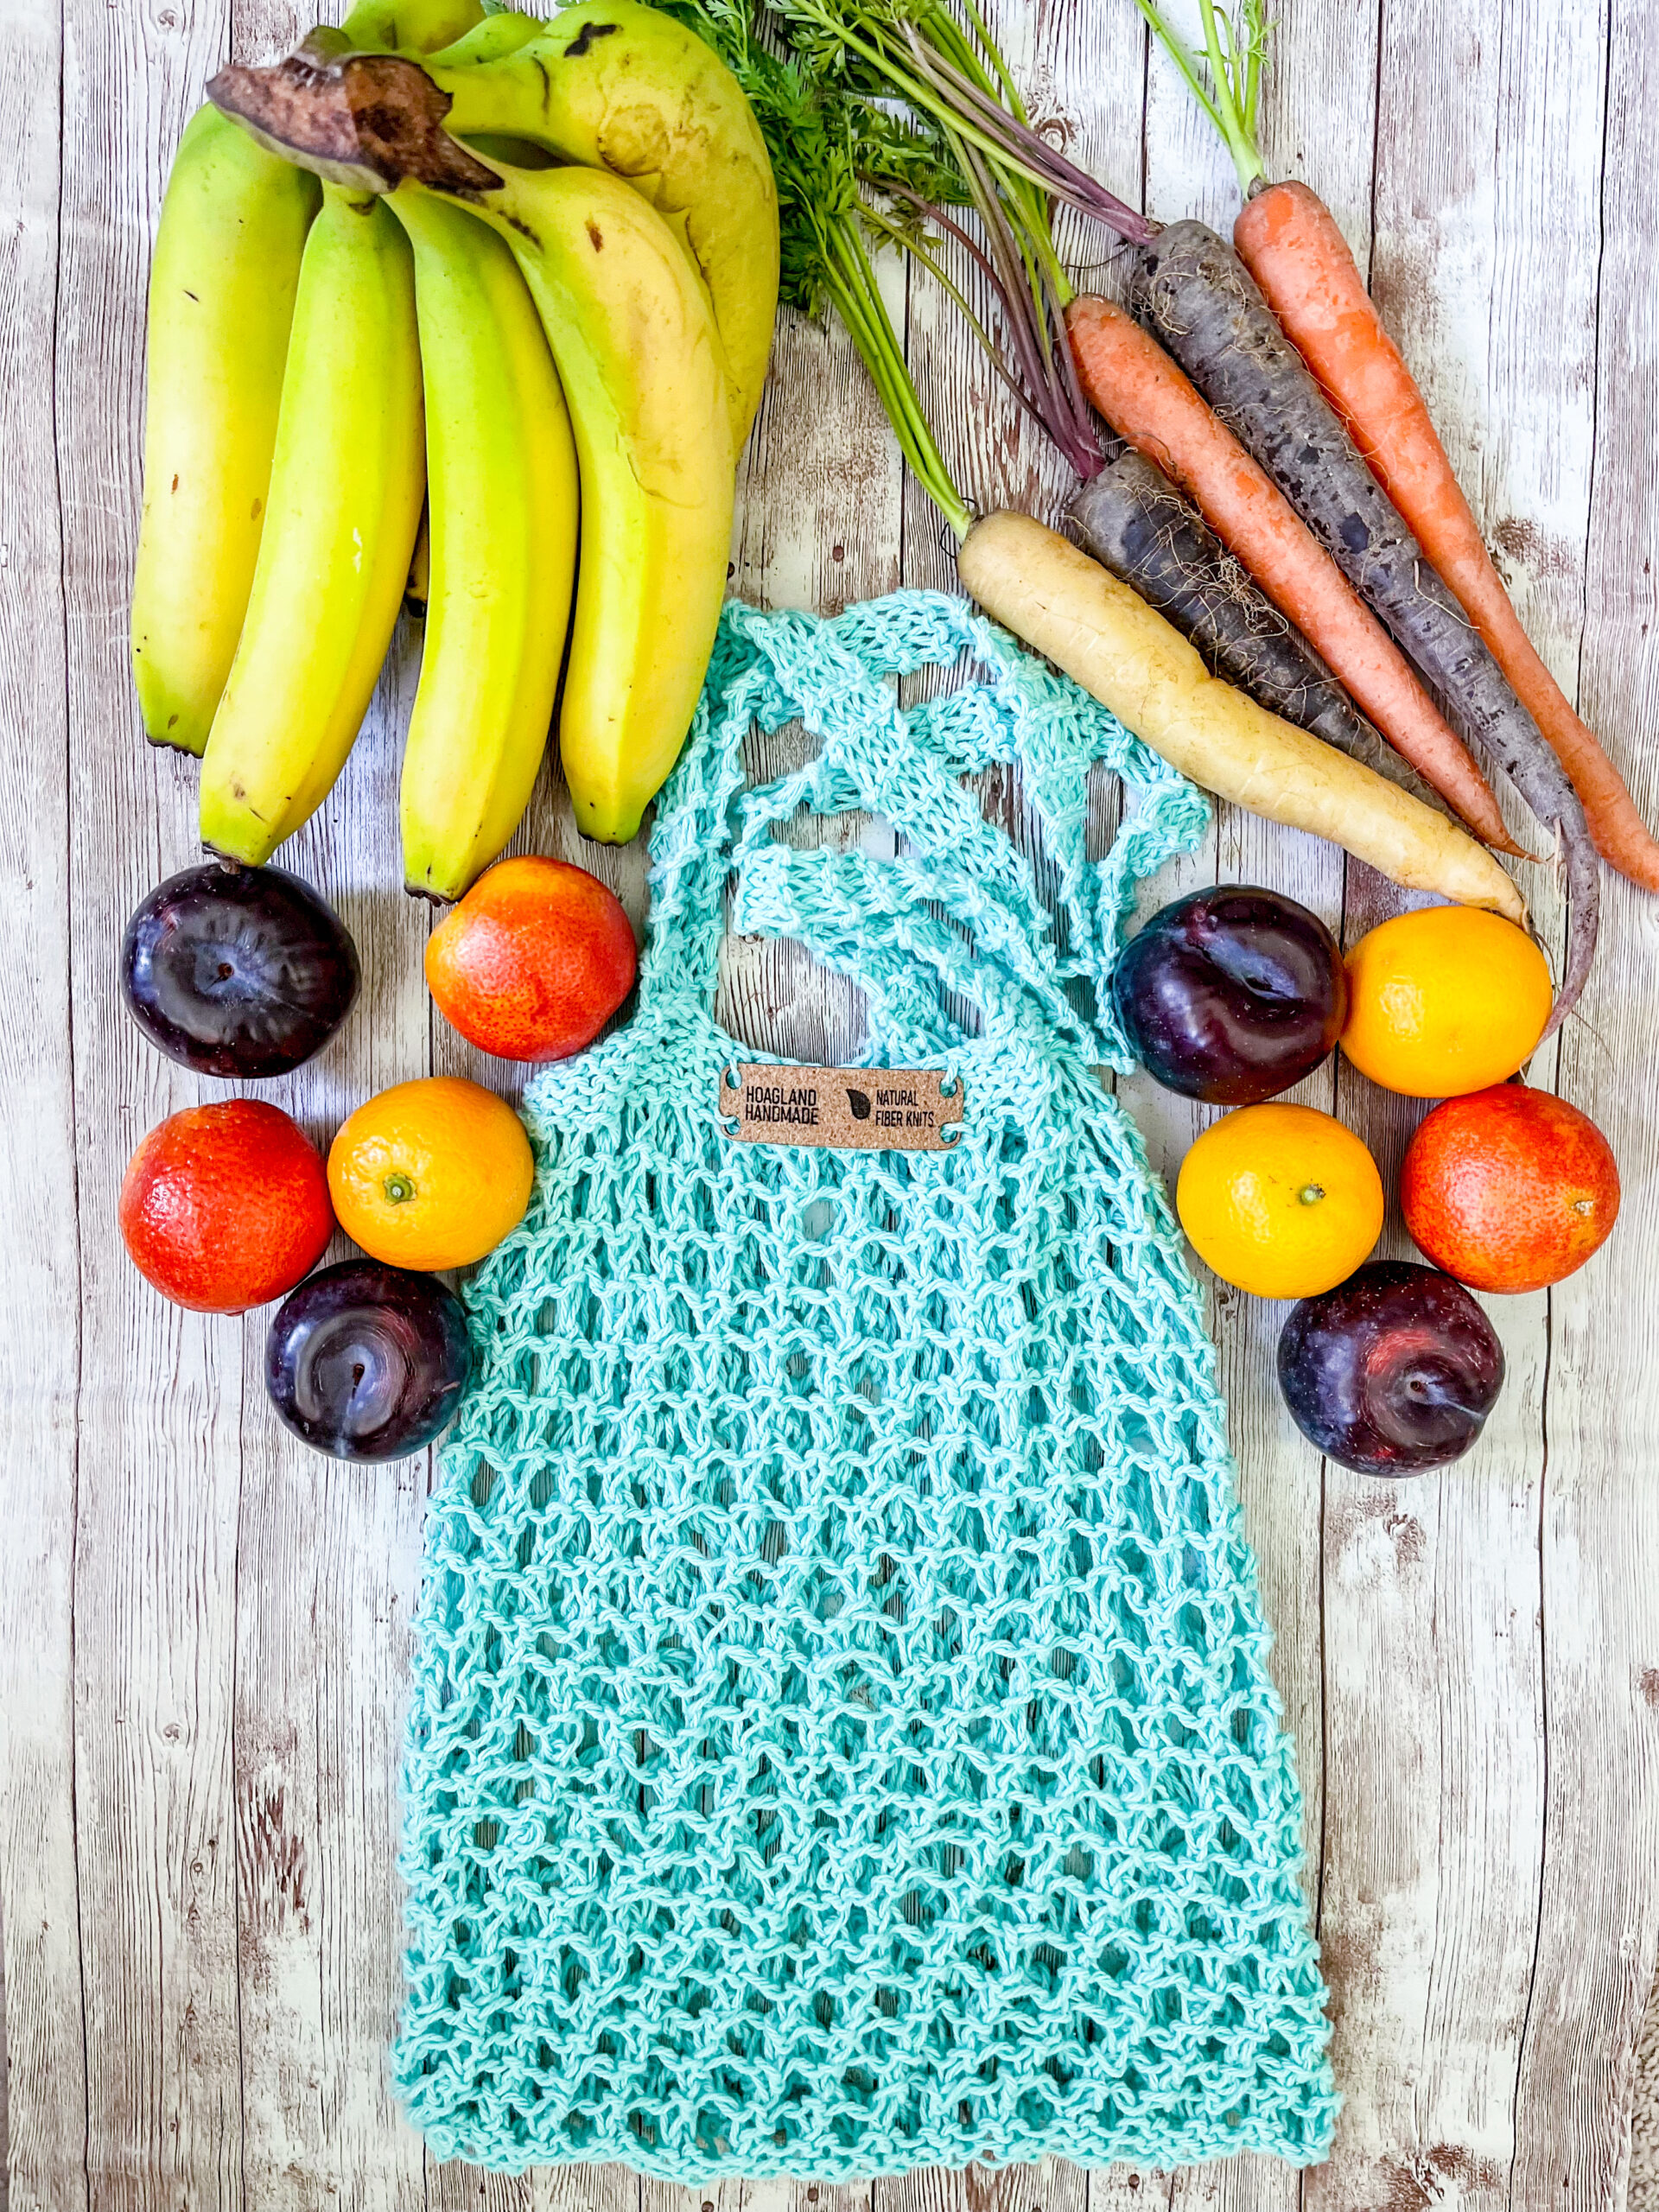 A teal recycled cotton mesh tote bag is surrounded by bananas, rainbow carrots, plums, oranges, and blood oranges